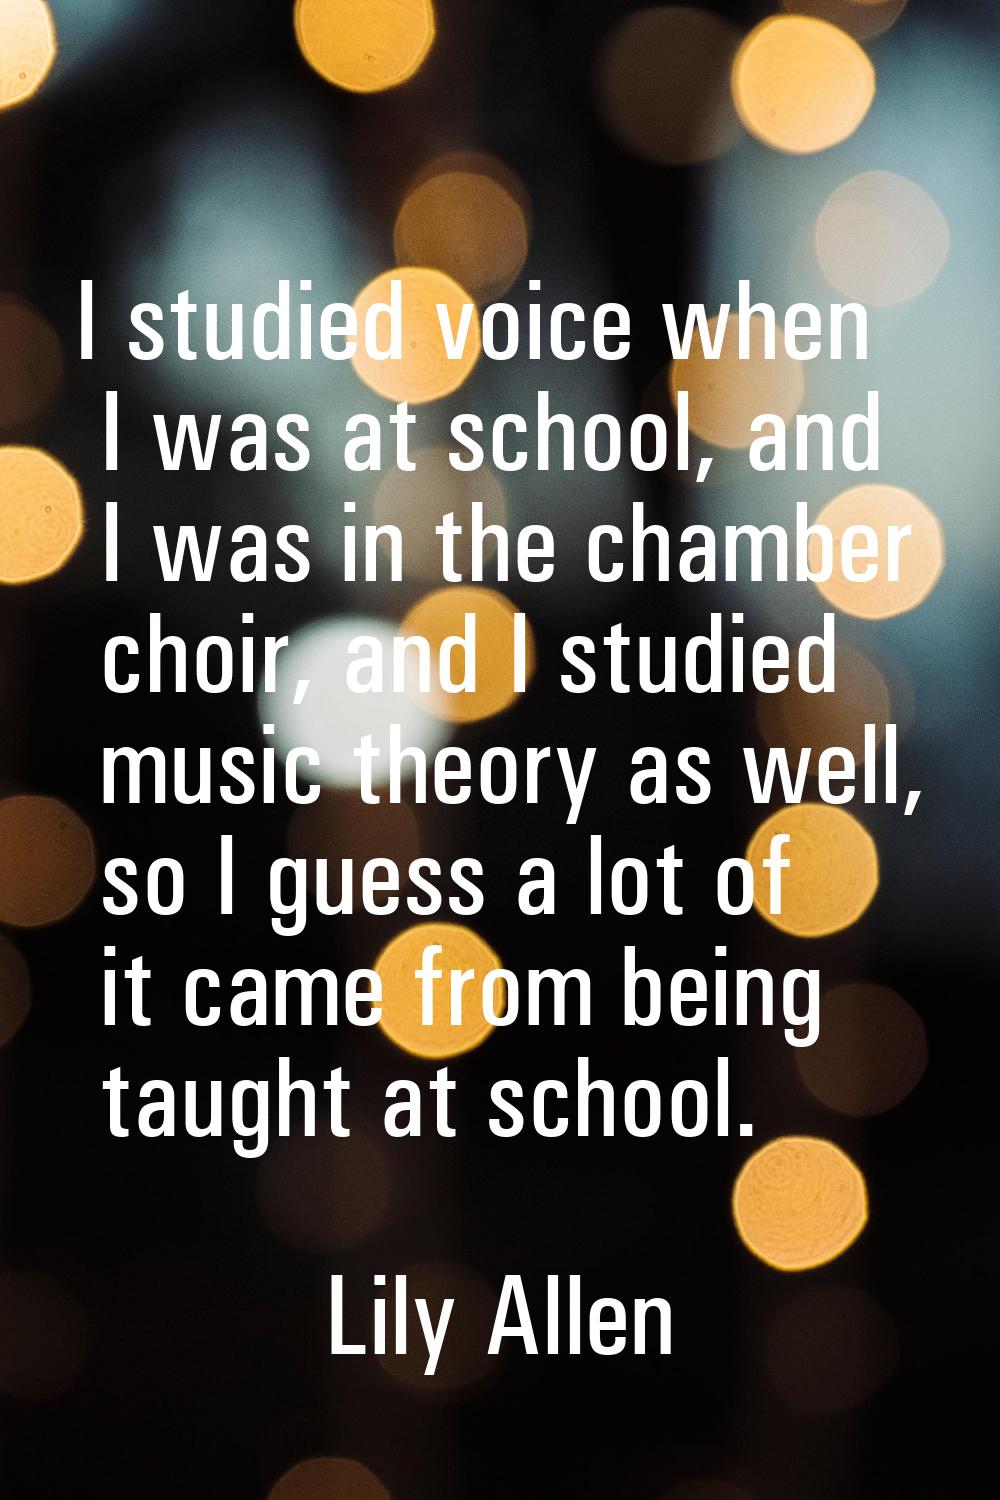 I studied voice when I was at school, and I was in the chamber choir, and I studied music theory as